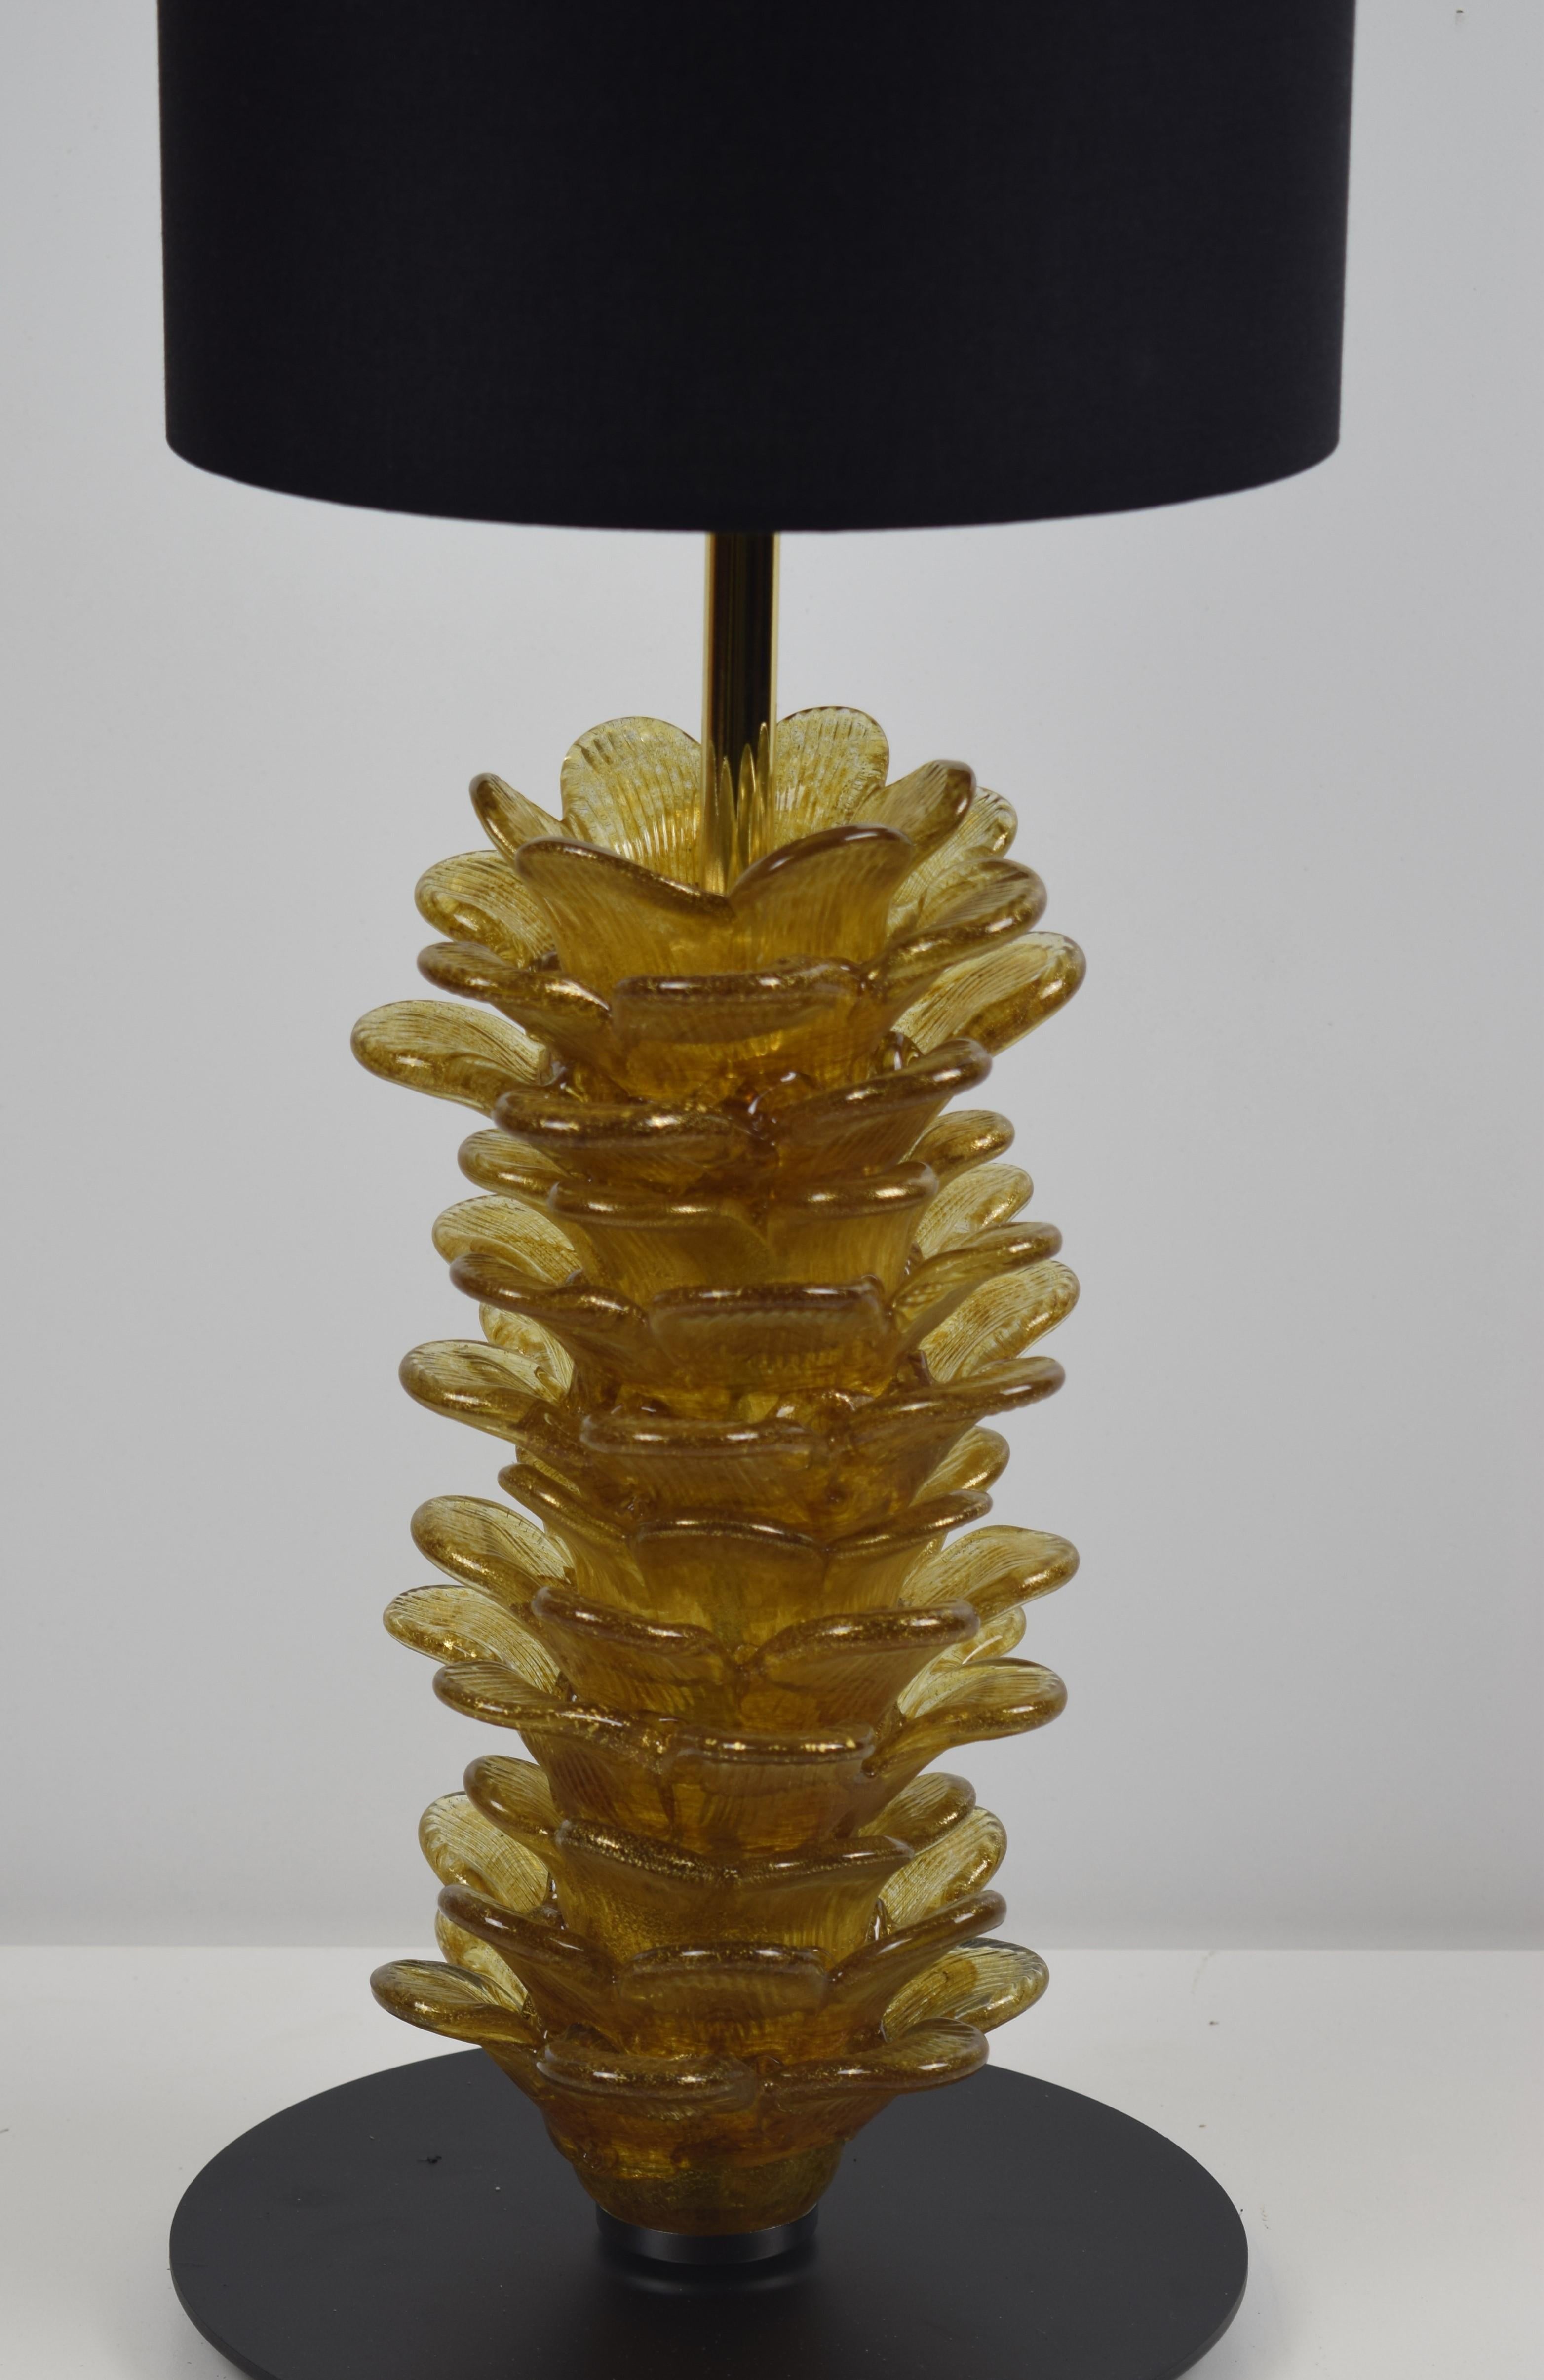 The Flowers collection of table lamps in blown glass represents an absolute novelty in the Eros Raffael production. This Venetian glass table lamp is a unique creation, which embodies the typical production of Murano glass with pure gold leaf.